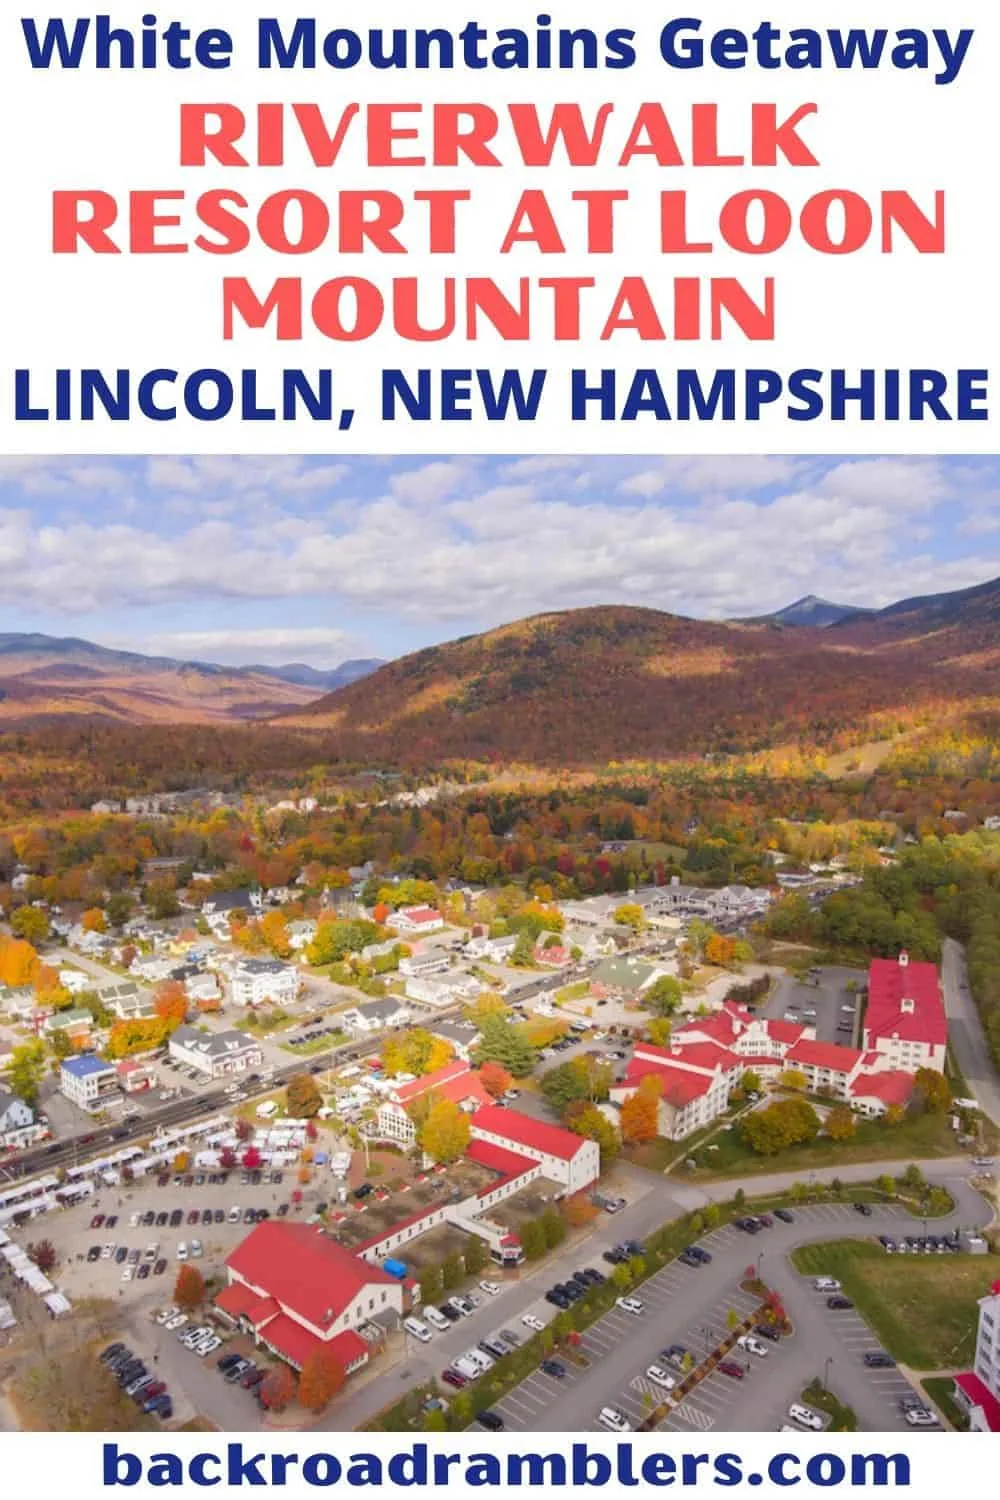 An aerial view of Lincoln, New Hampshire and RiverWalk Resort at Loon Mountain in the fall. Text overlay: White Mountains Getaway - RiverWalk Resort at Loon Mountain in Lincoln, New Hampshire.